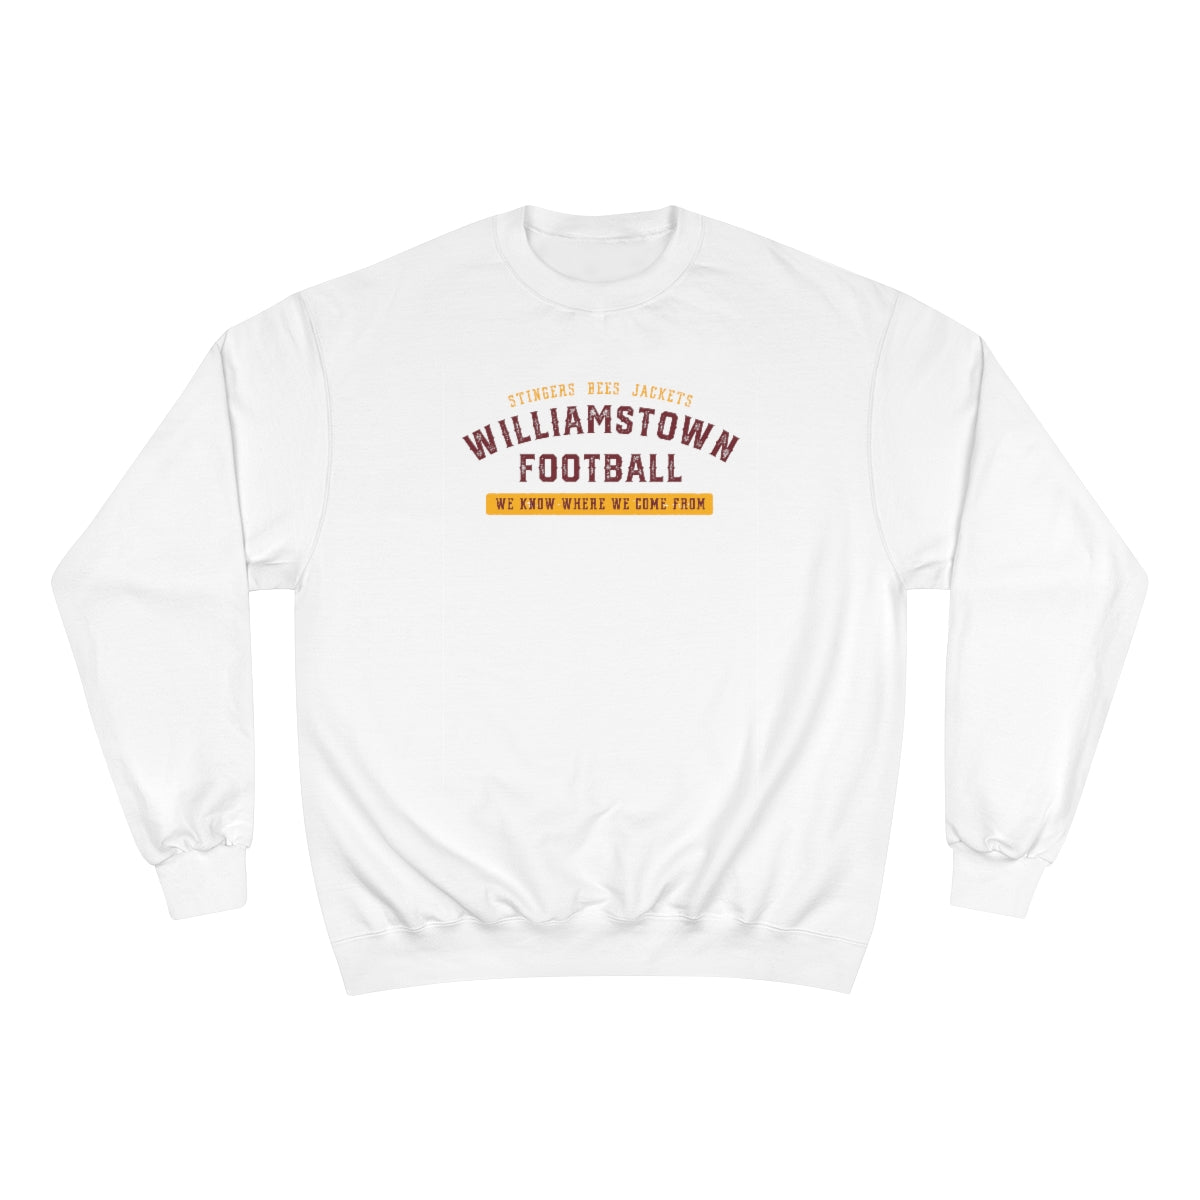 STINGERS BEES JACKETS-WE KNOW WHERE WE COME FROM-WILLIAMSTOWN FOOTBALL-Champion Sweatshirt